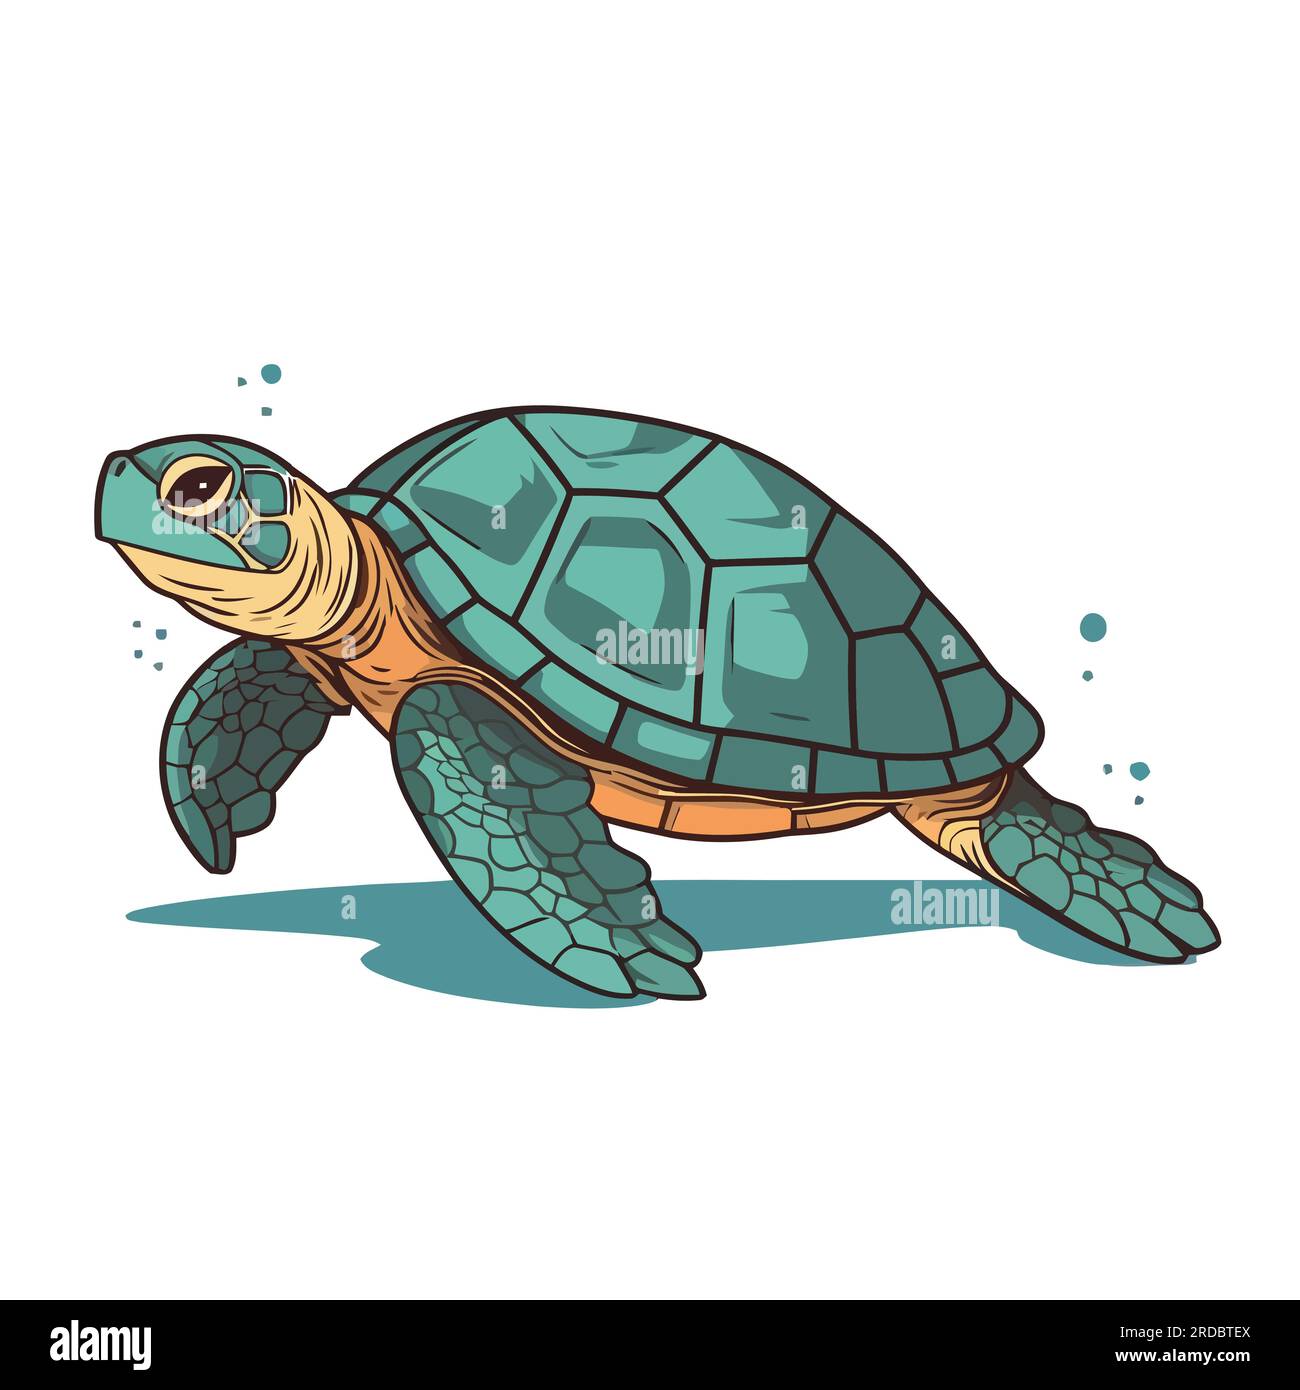 Turtle image. Abstract cute turtle. Stock Vector